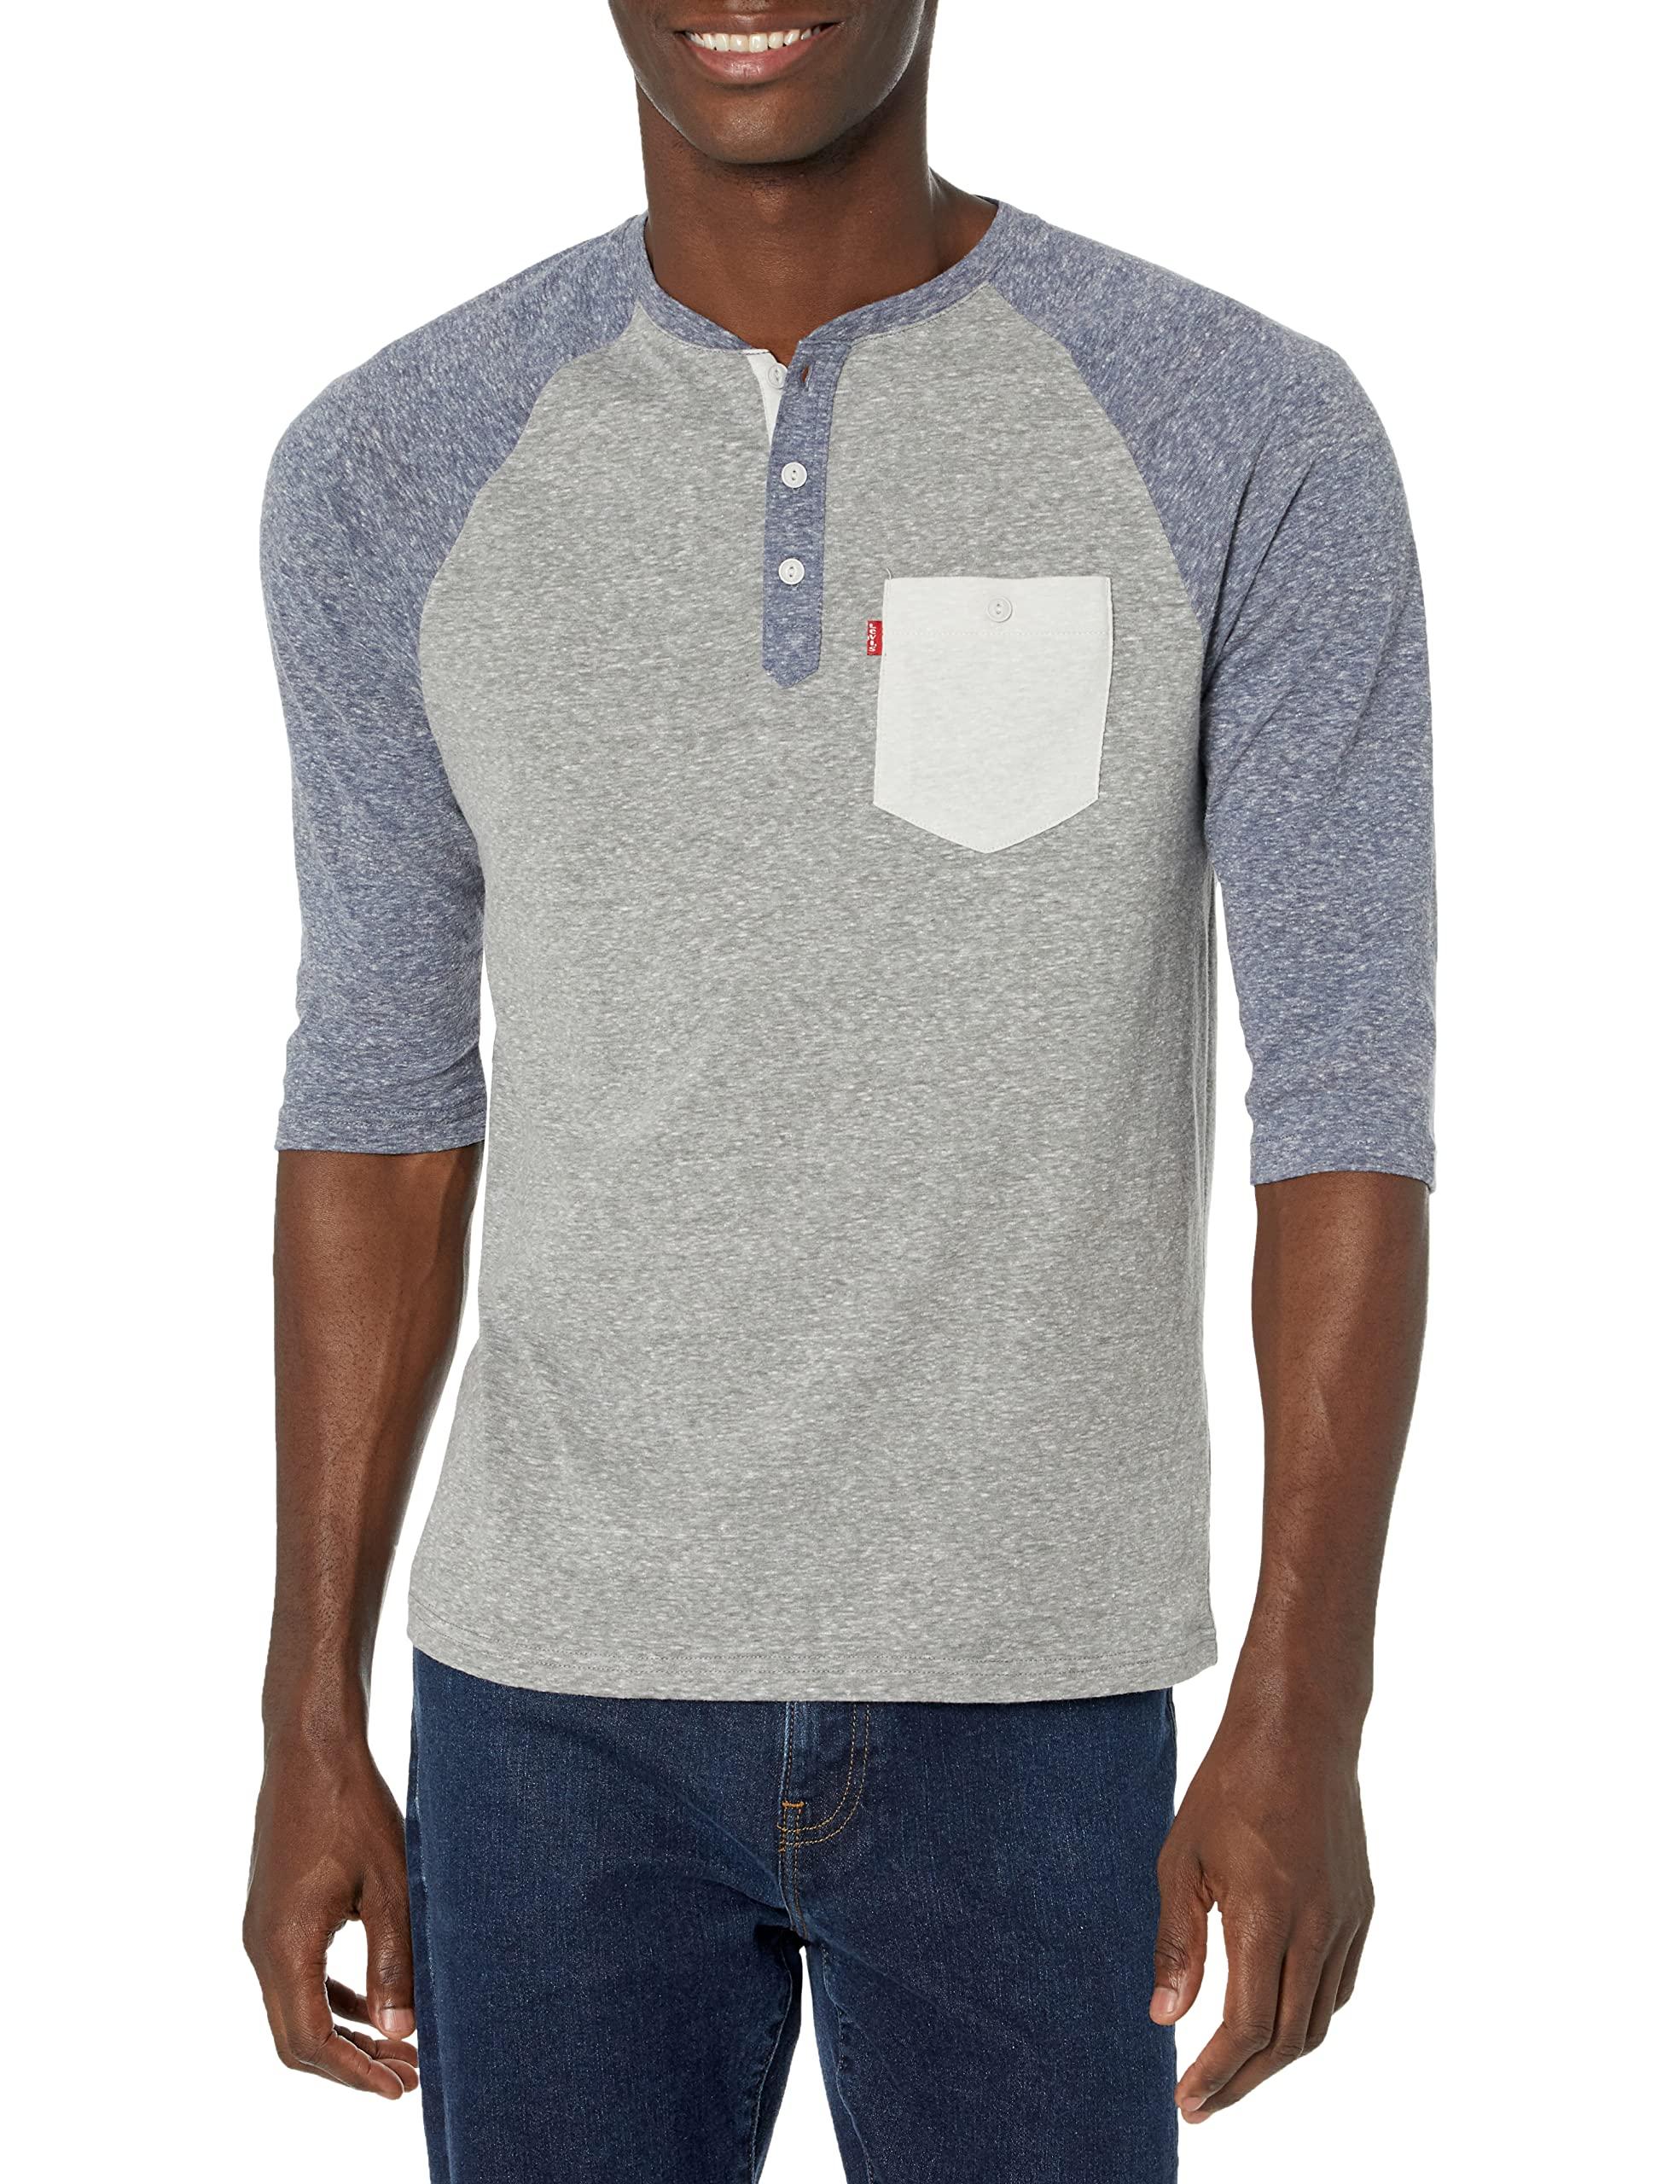 Levi's Marble Henley Shirt in Grey (Gray) for Men - Lyst